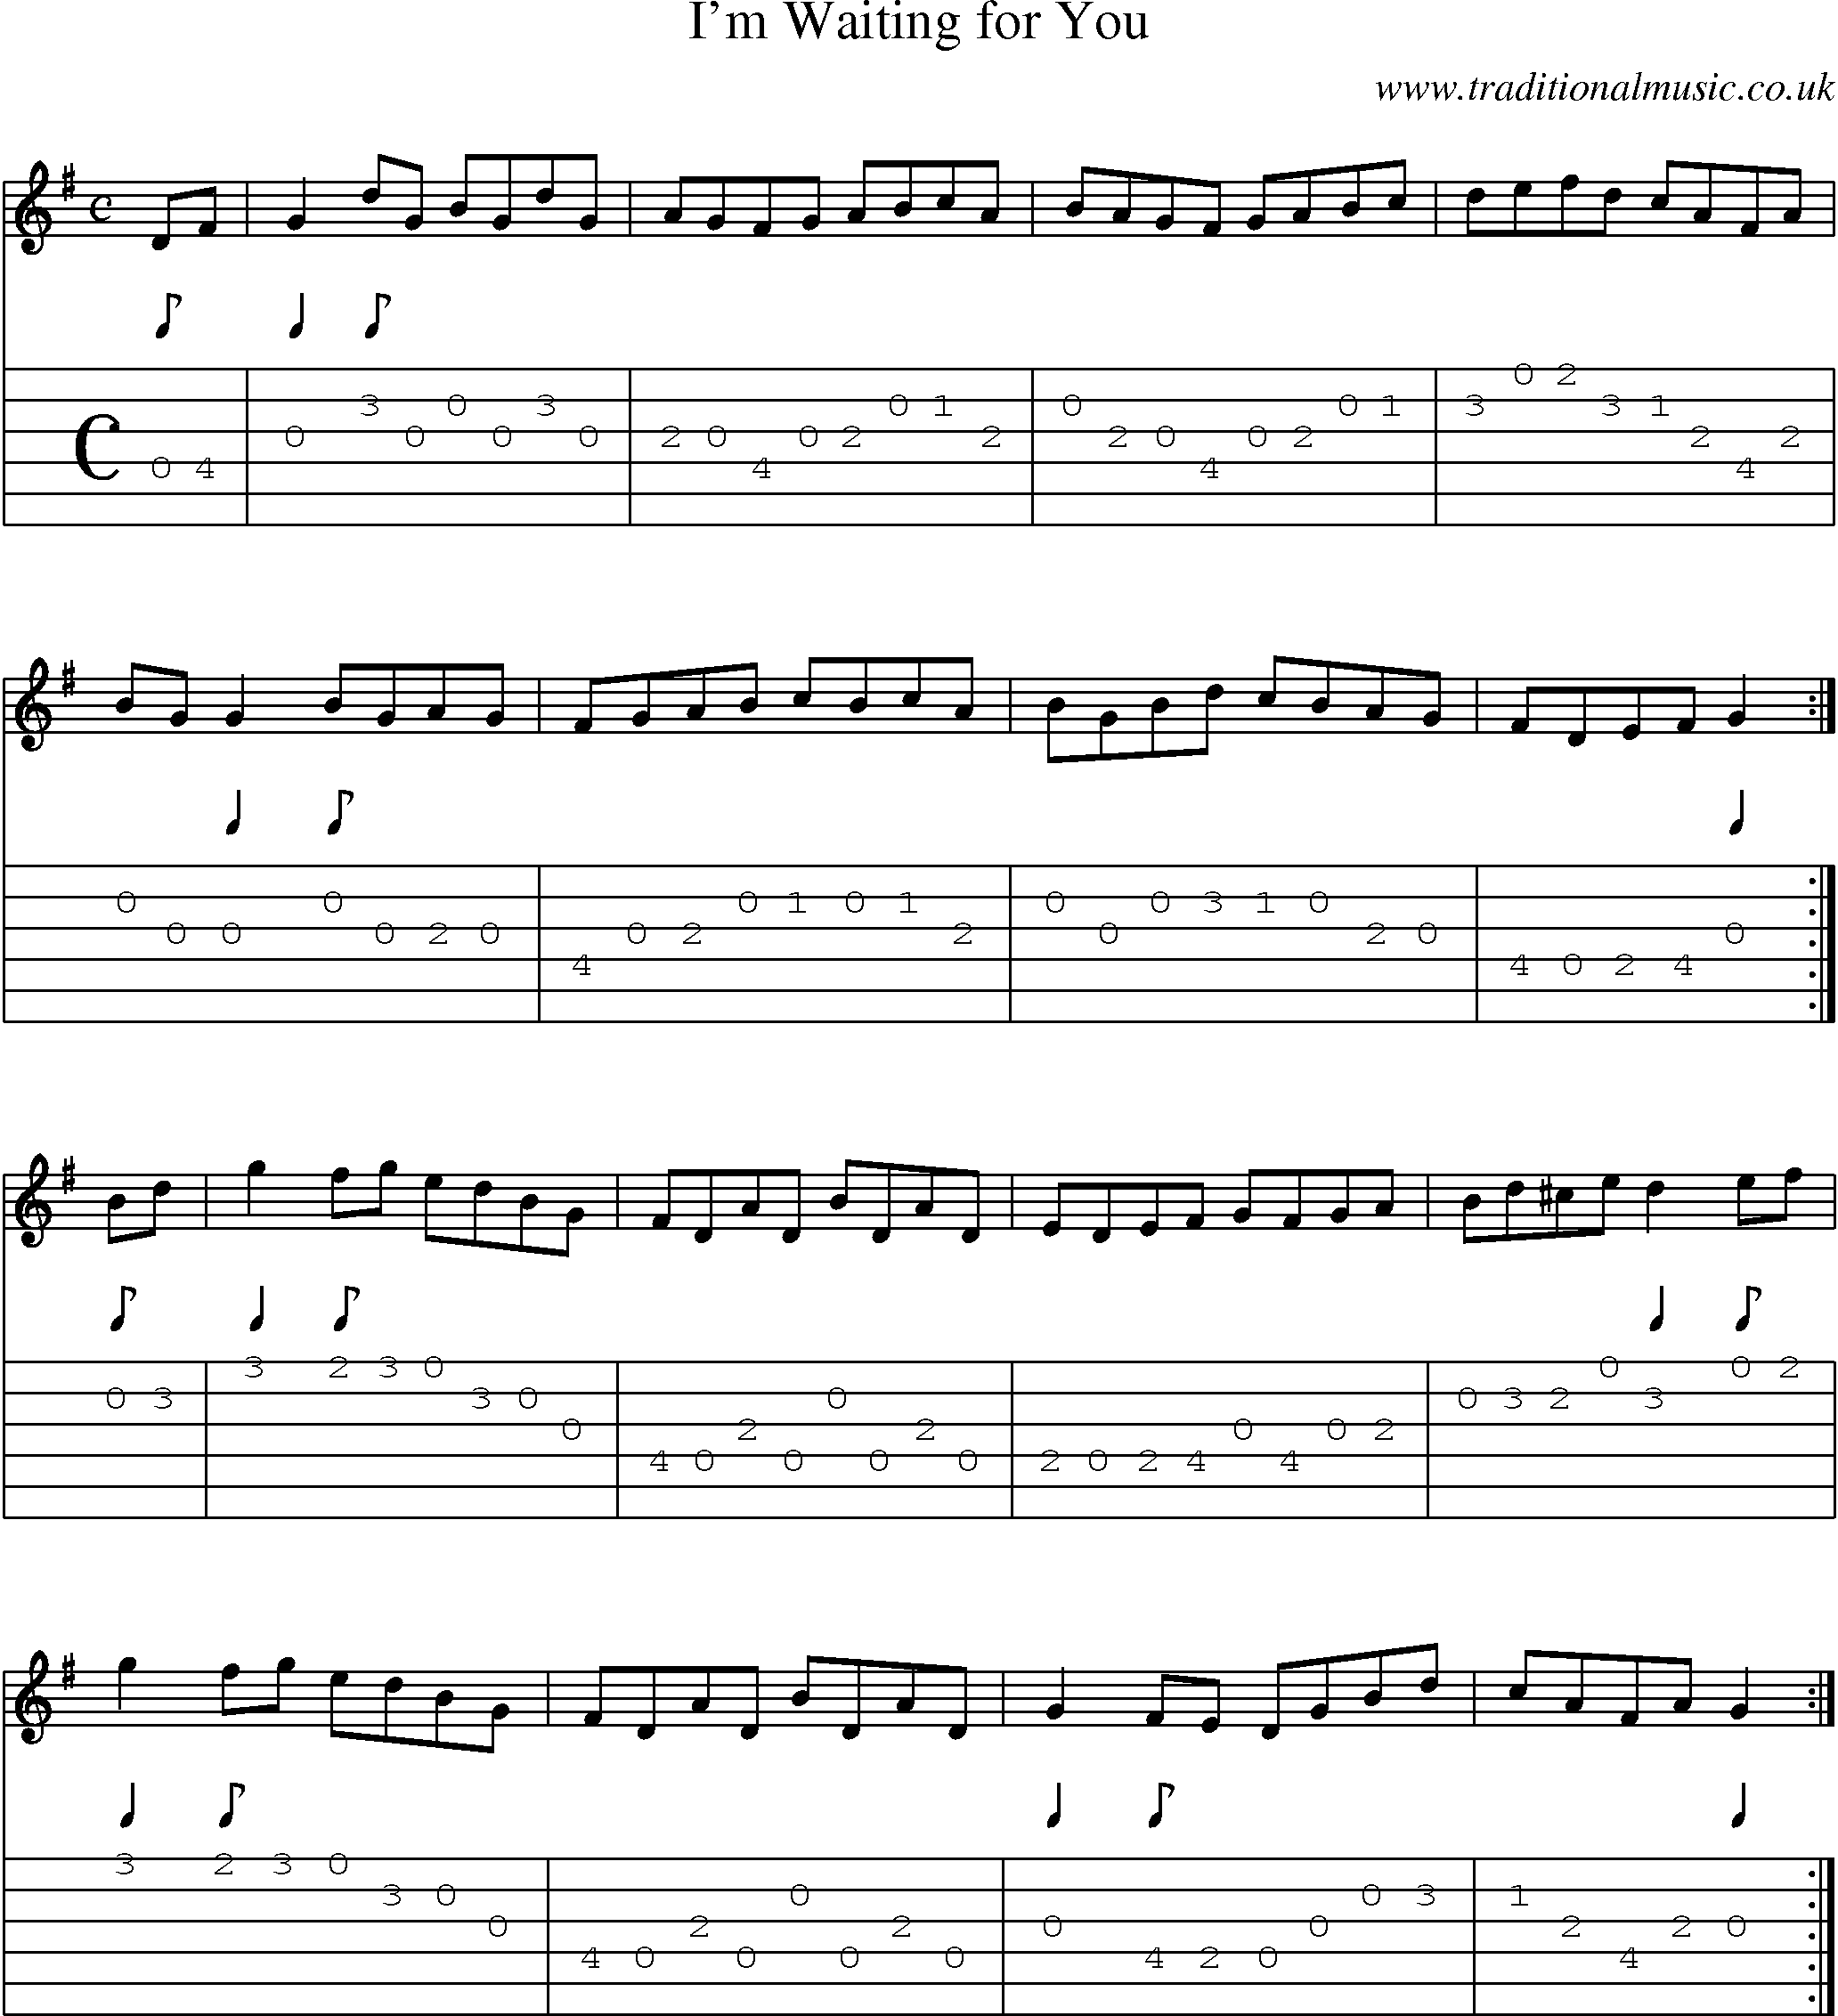 Music Score and Guitar Tabs for Im Waiting For You